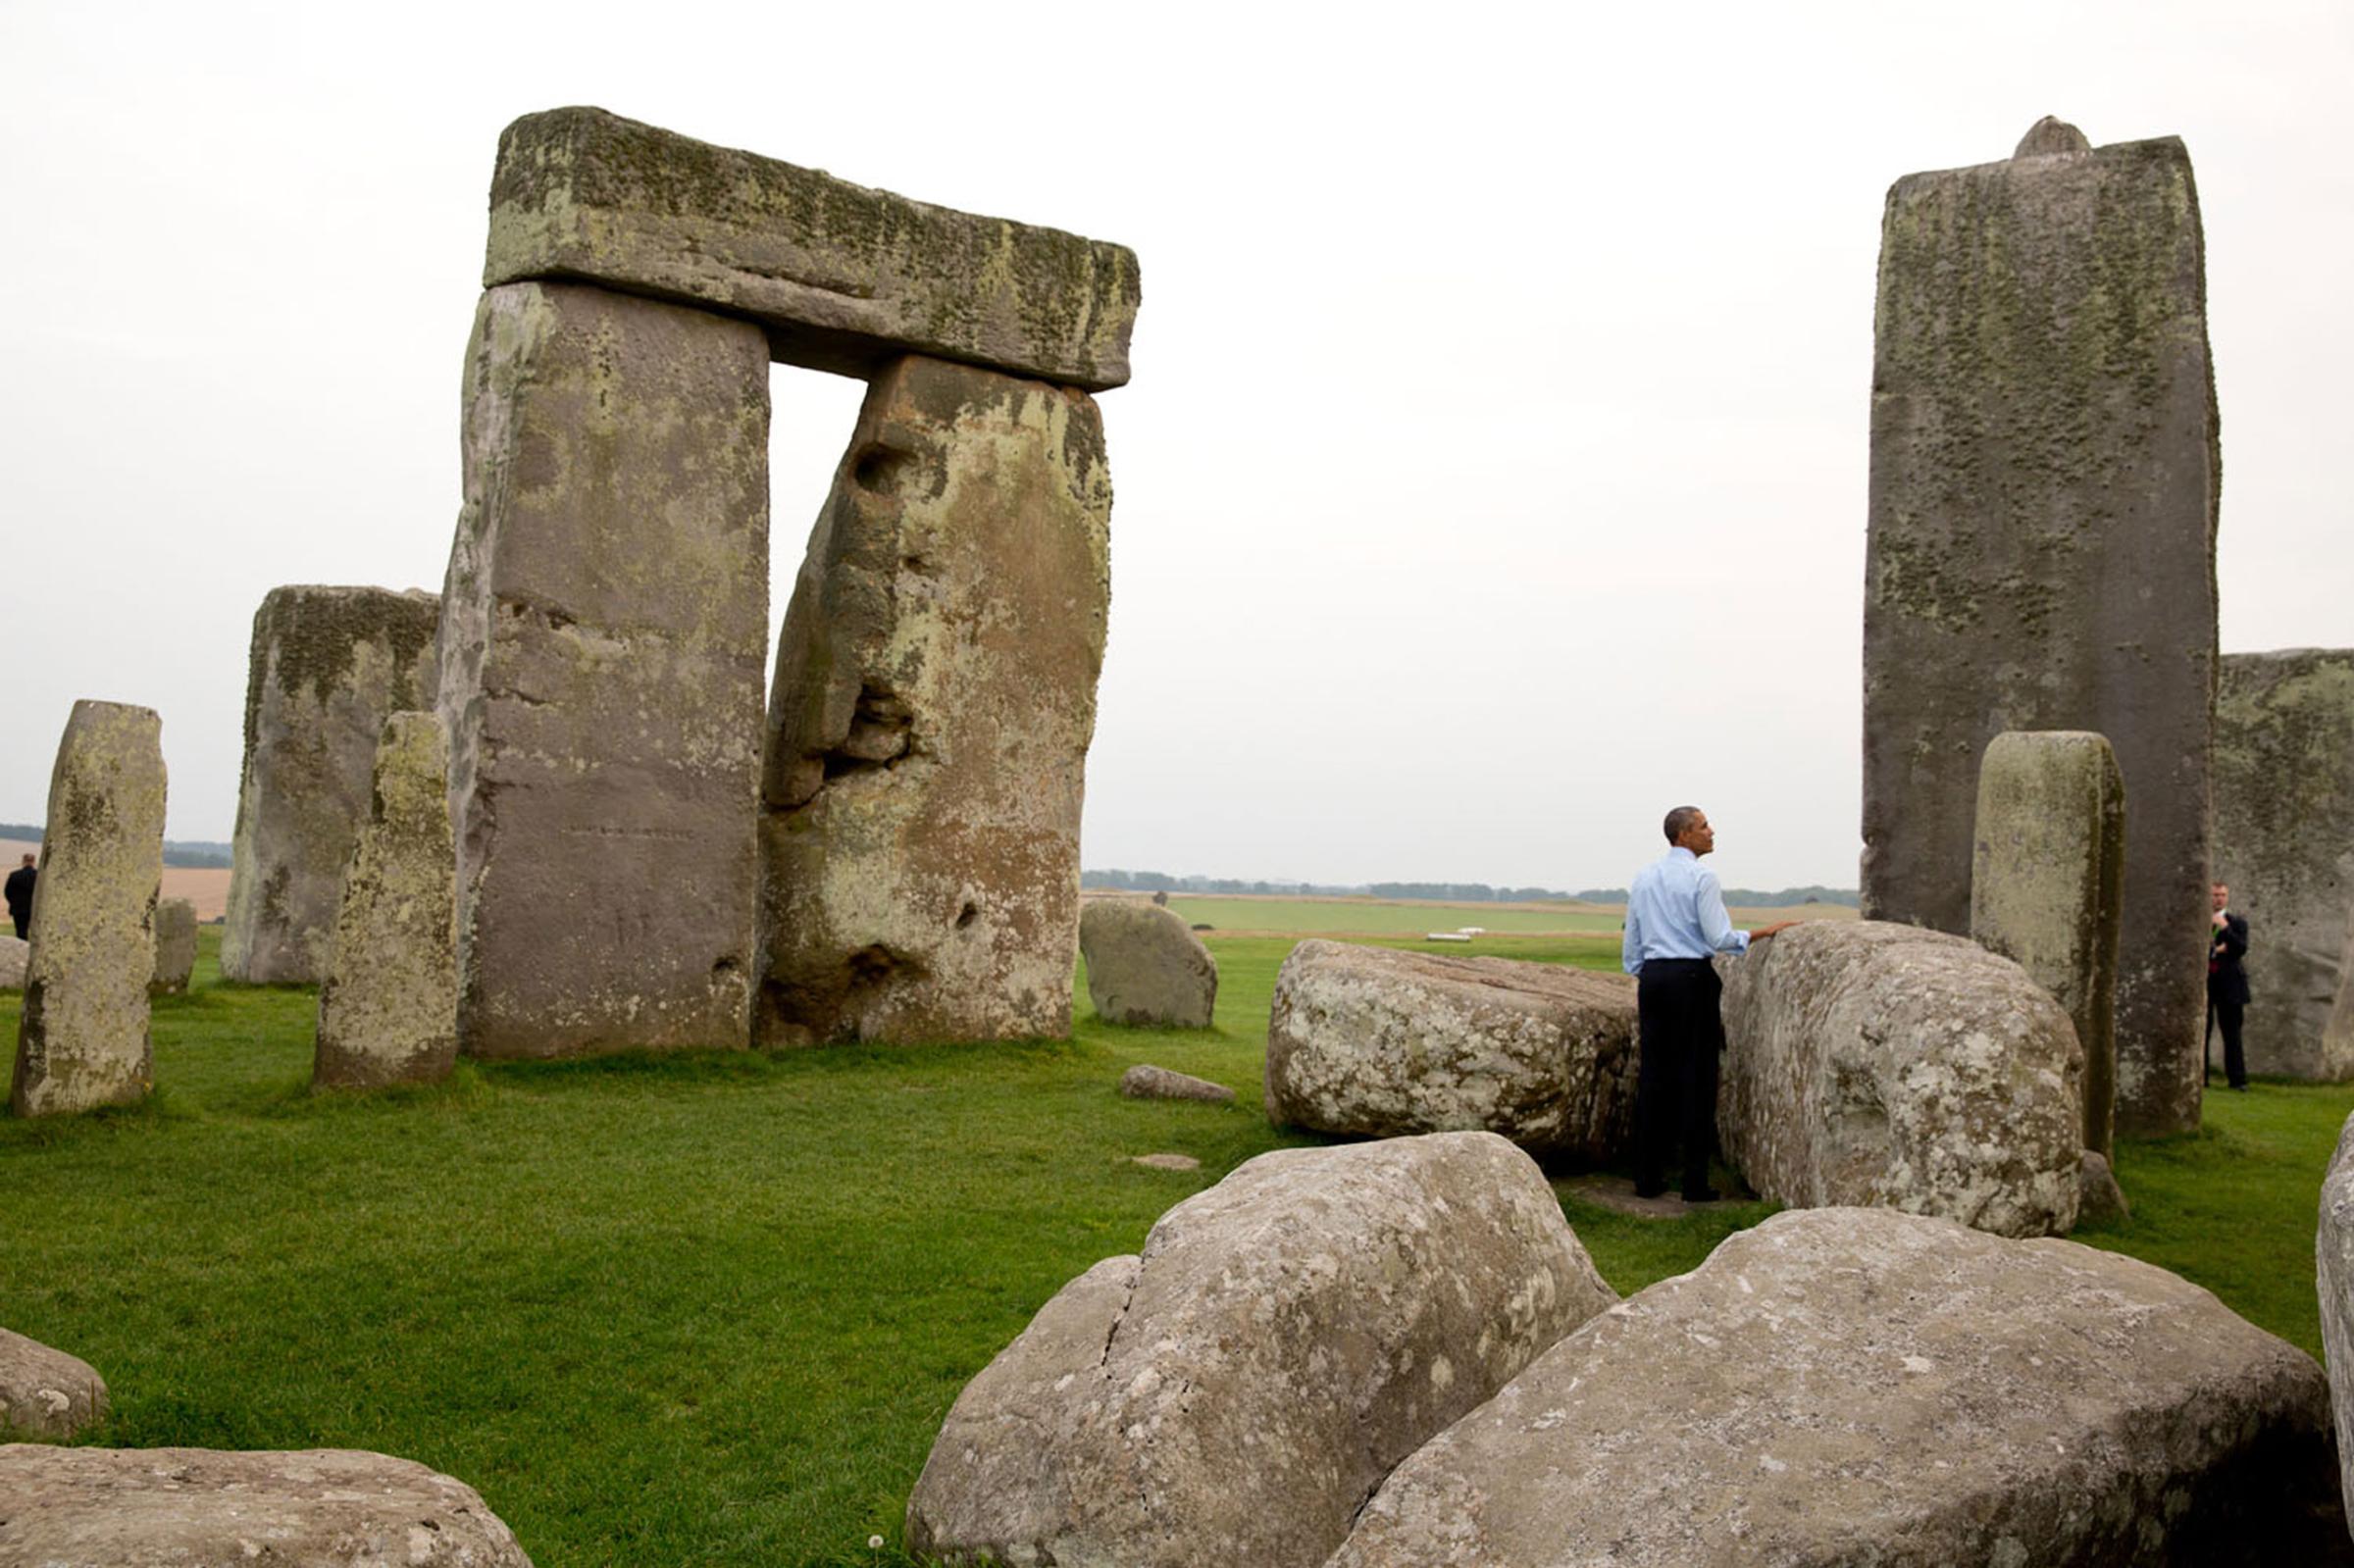 "We were at the NATO Summit in Wales when someone mentioned to the President that Stonehenge wasn't that far away. 'Let's go,' he said. So when the Summit ended, we took a slight detour on the way back to Air Force One," September 5, 2014.